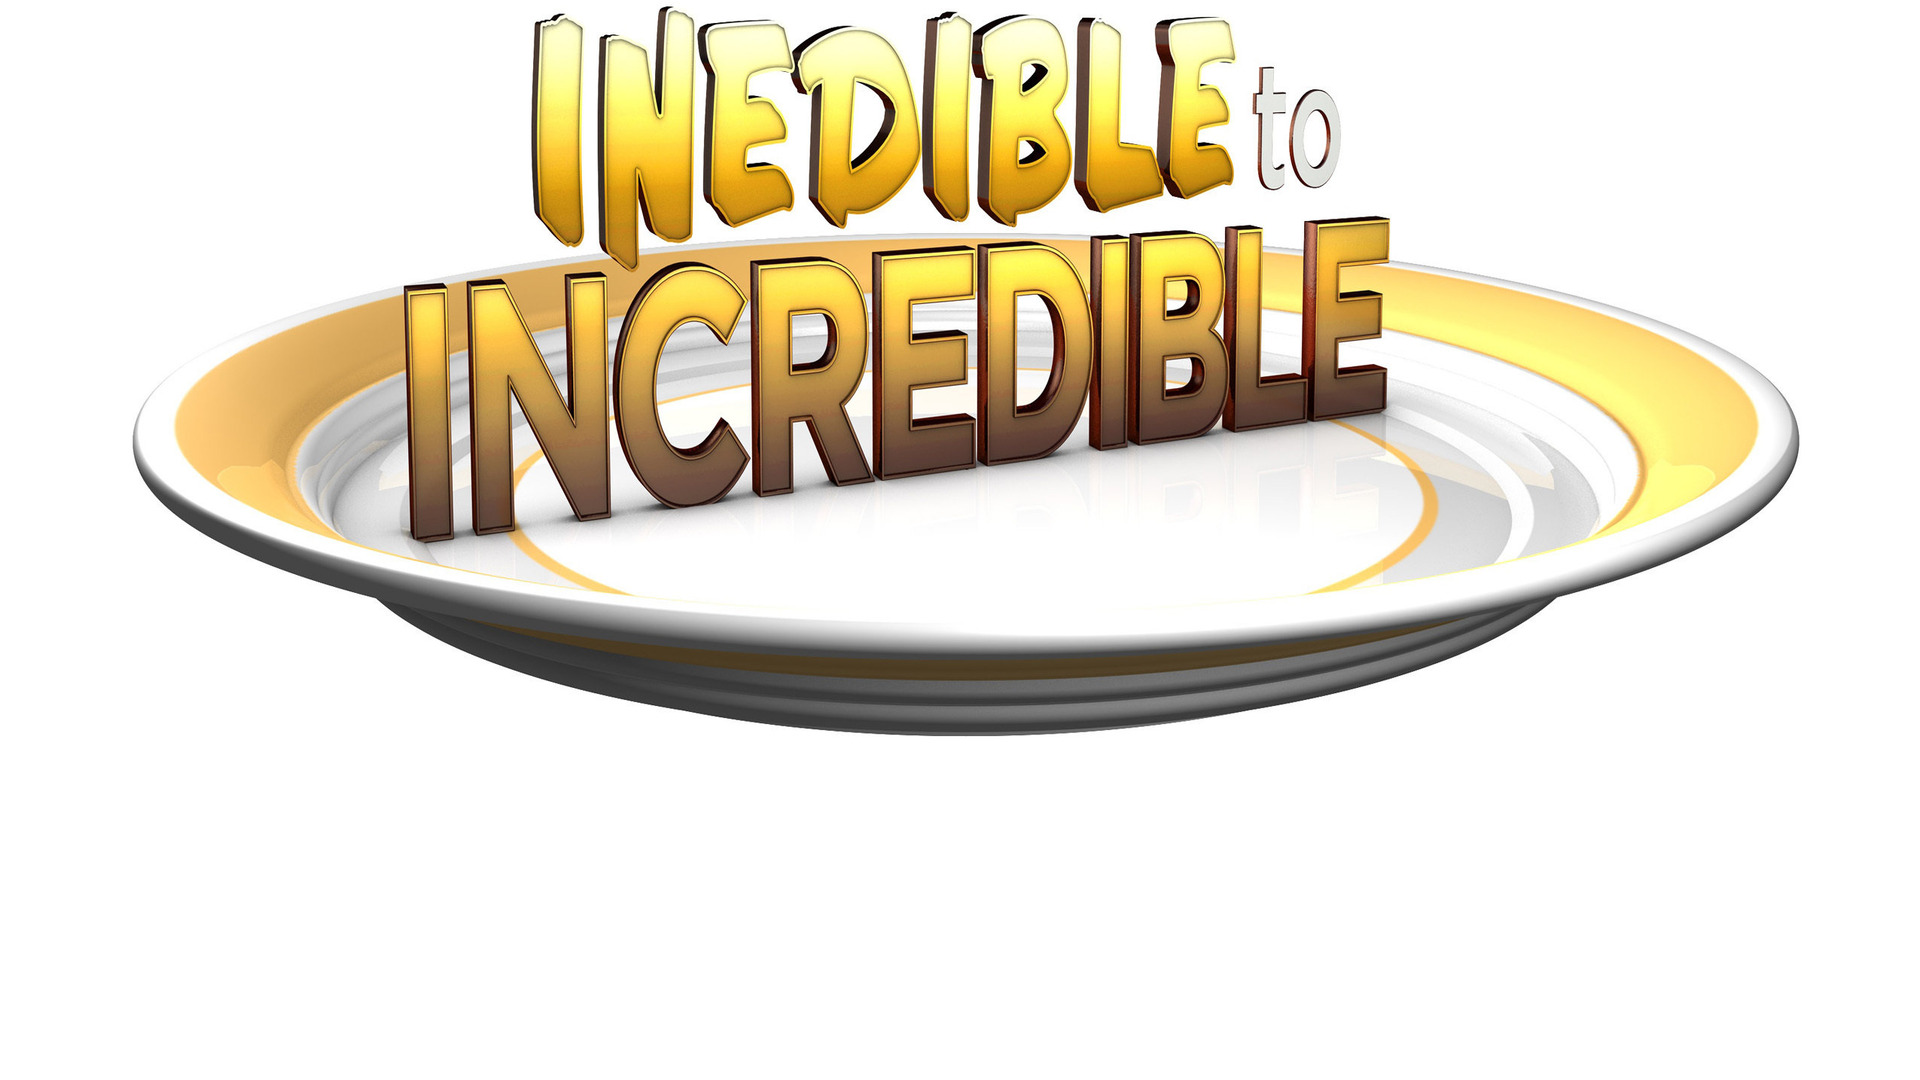 Show Inedible to Incredible